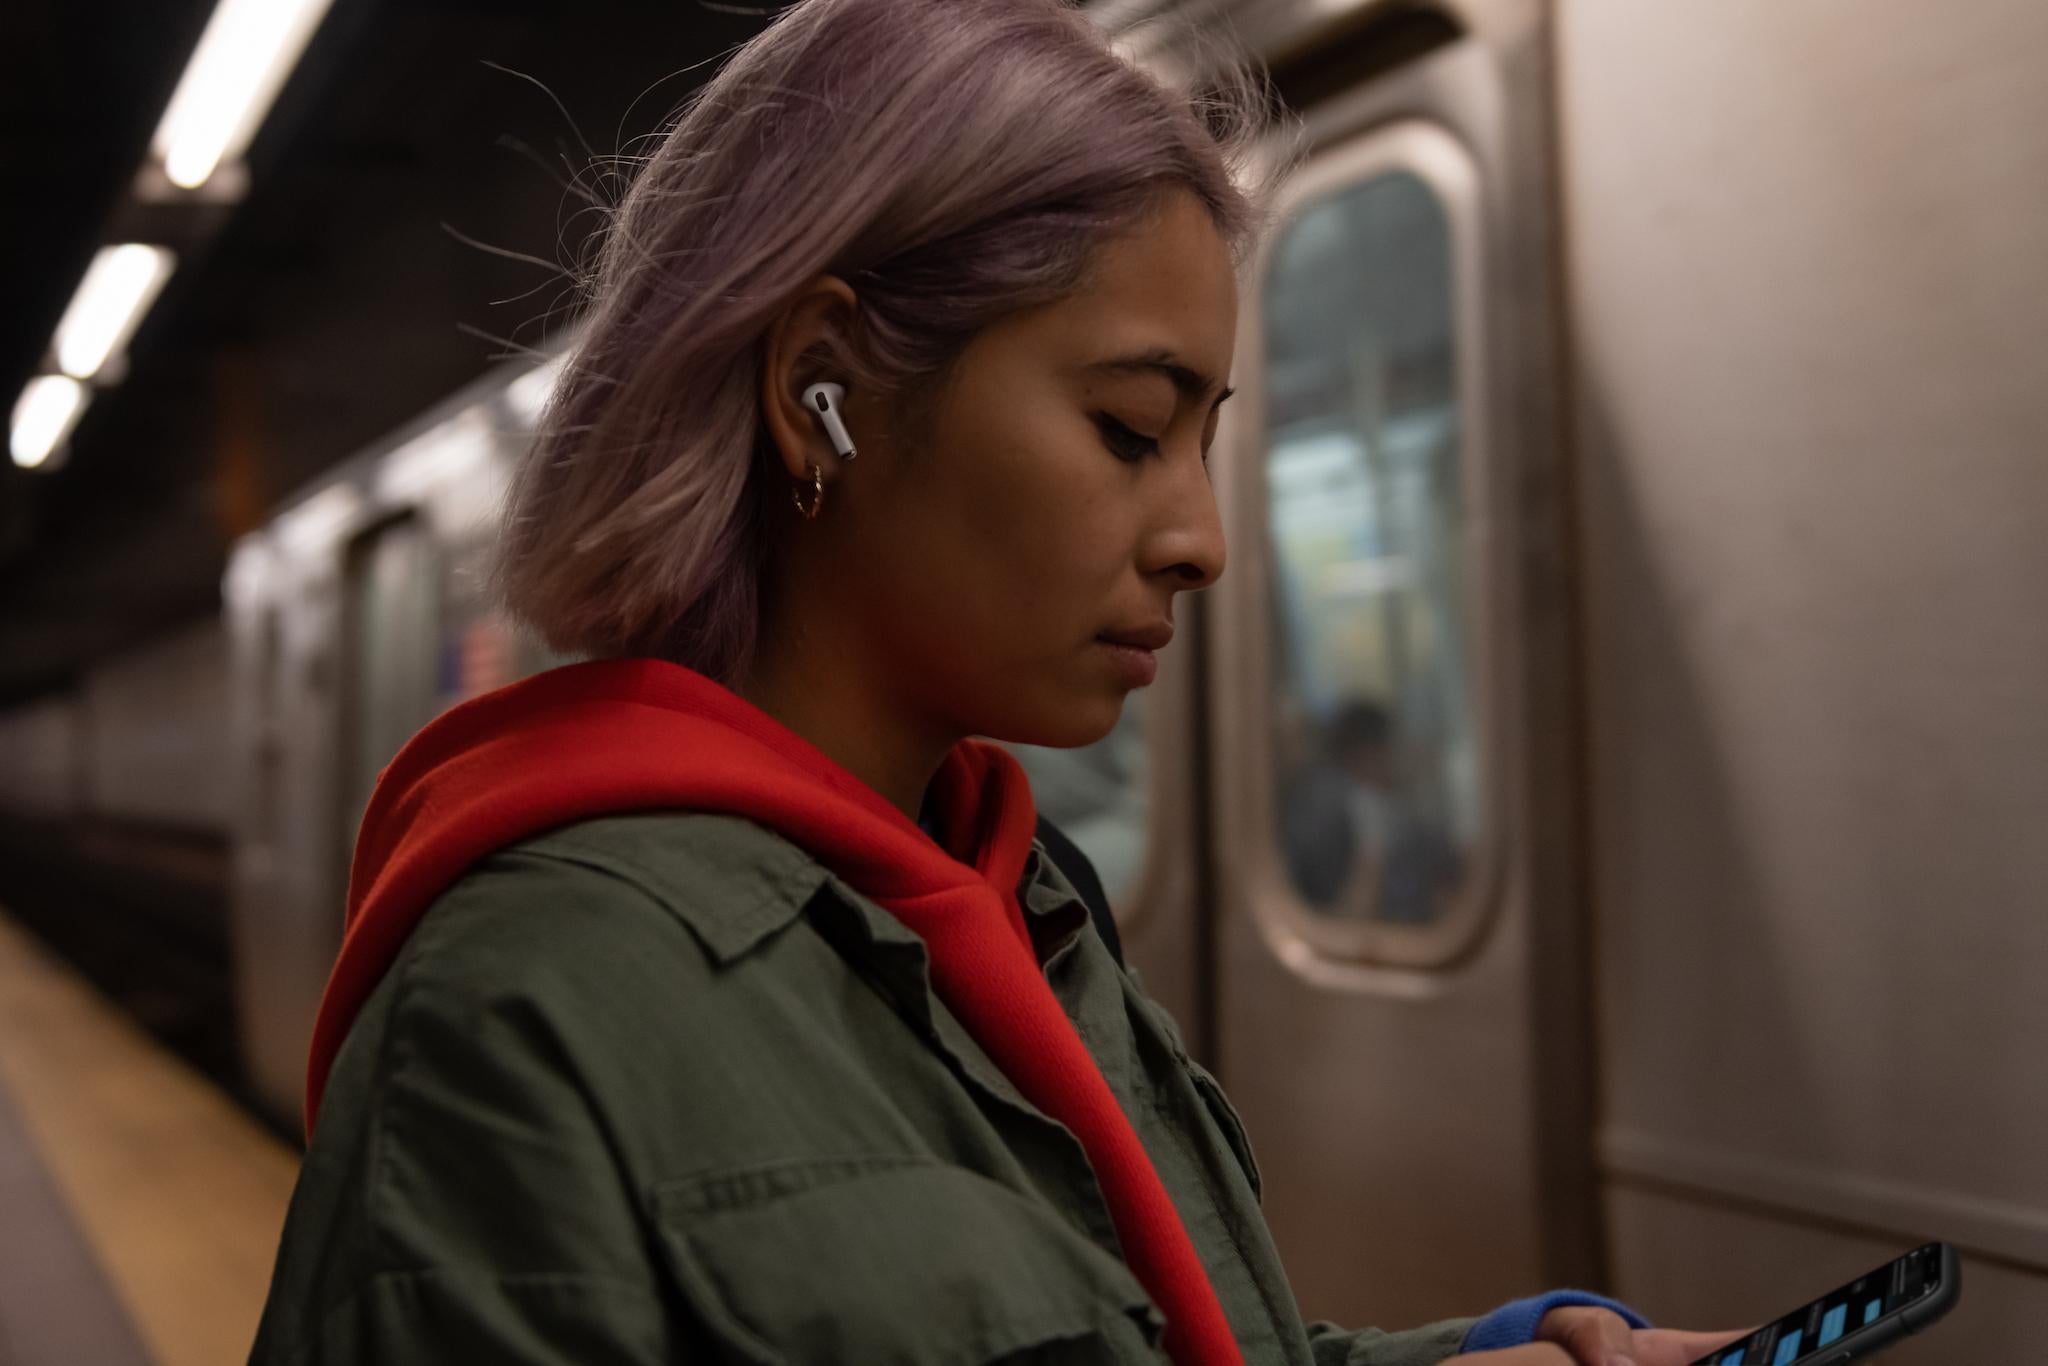 AirPods Pro: Something has happened to Apple earphones' noise cancelling, users complain